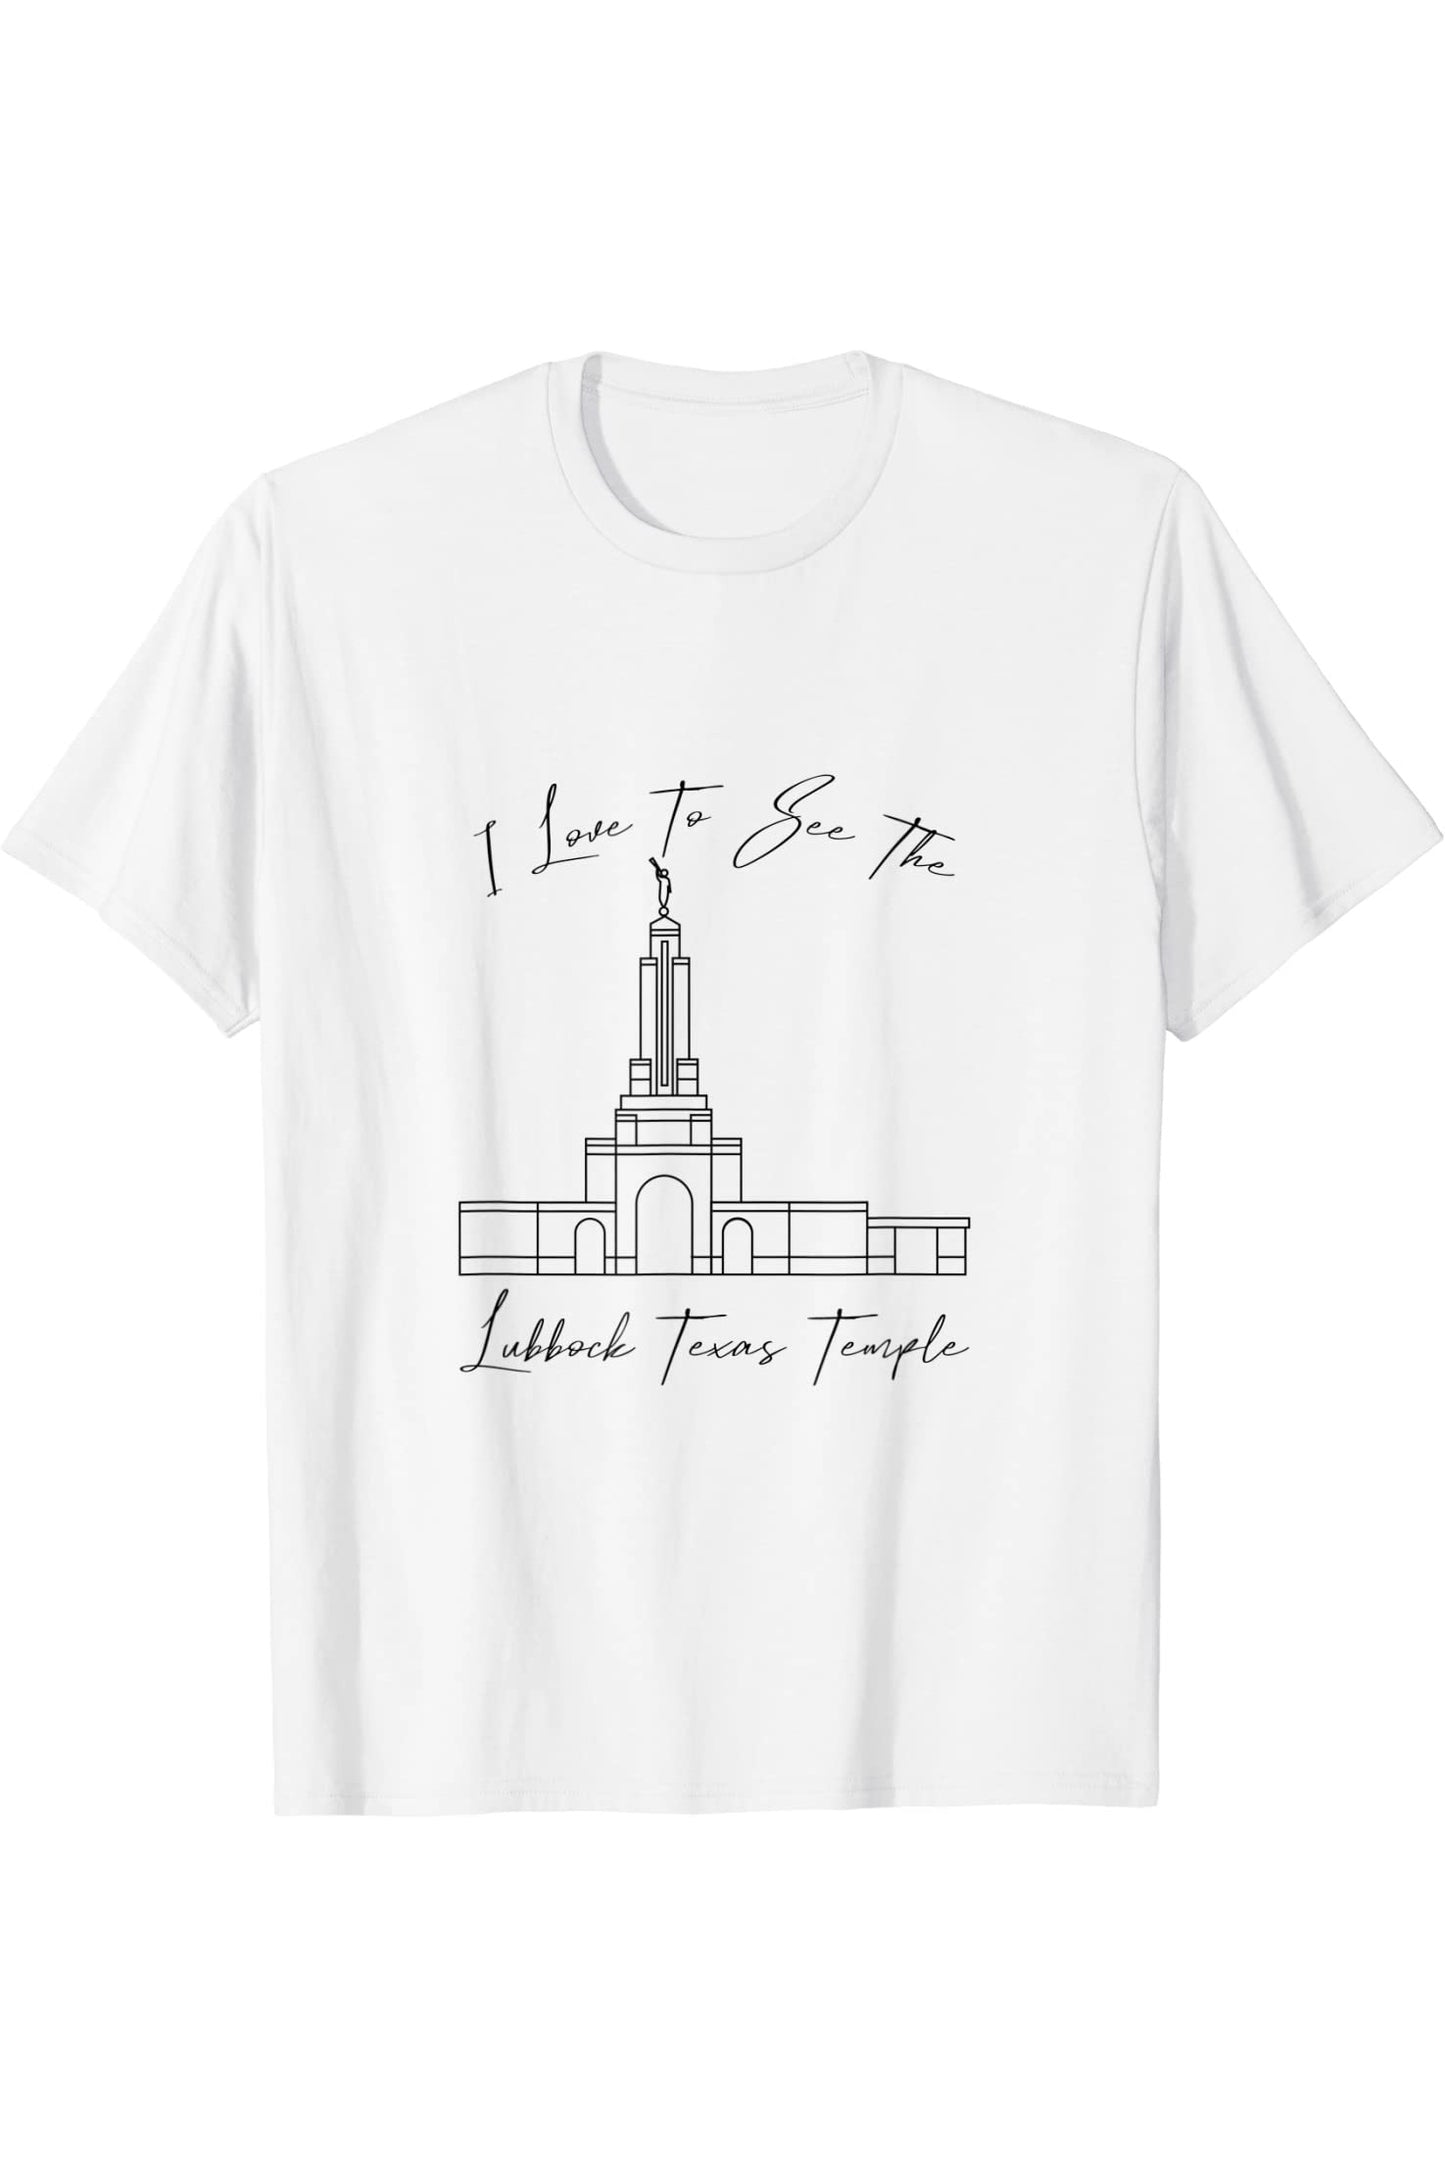 Lubbock Texas Temple T-Shirt - Calligraphy Style (English) US